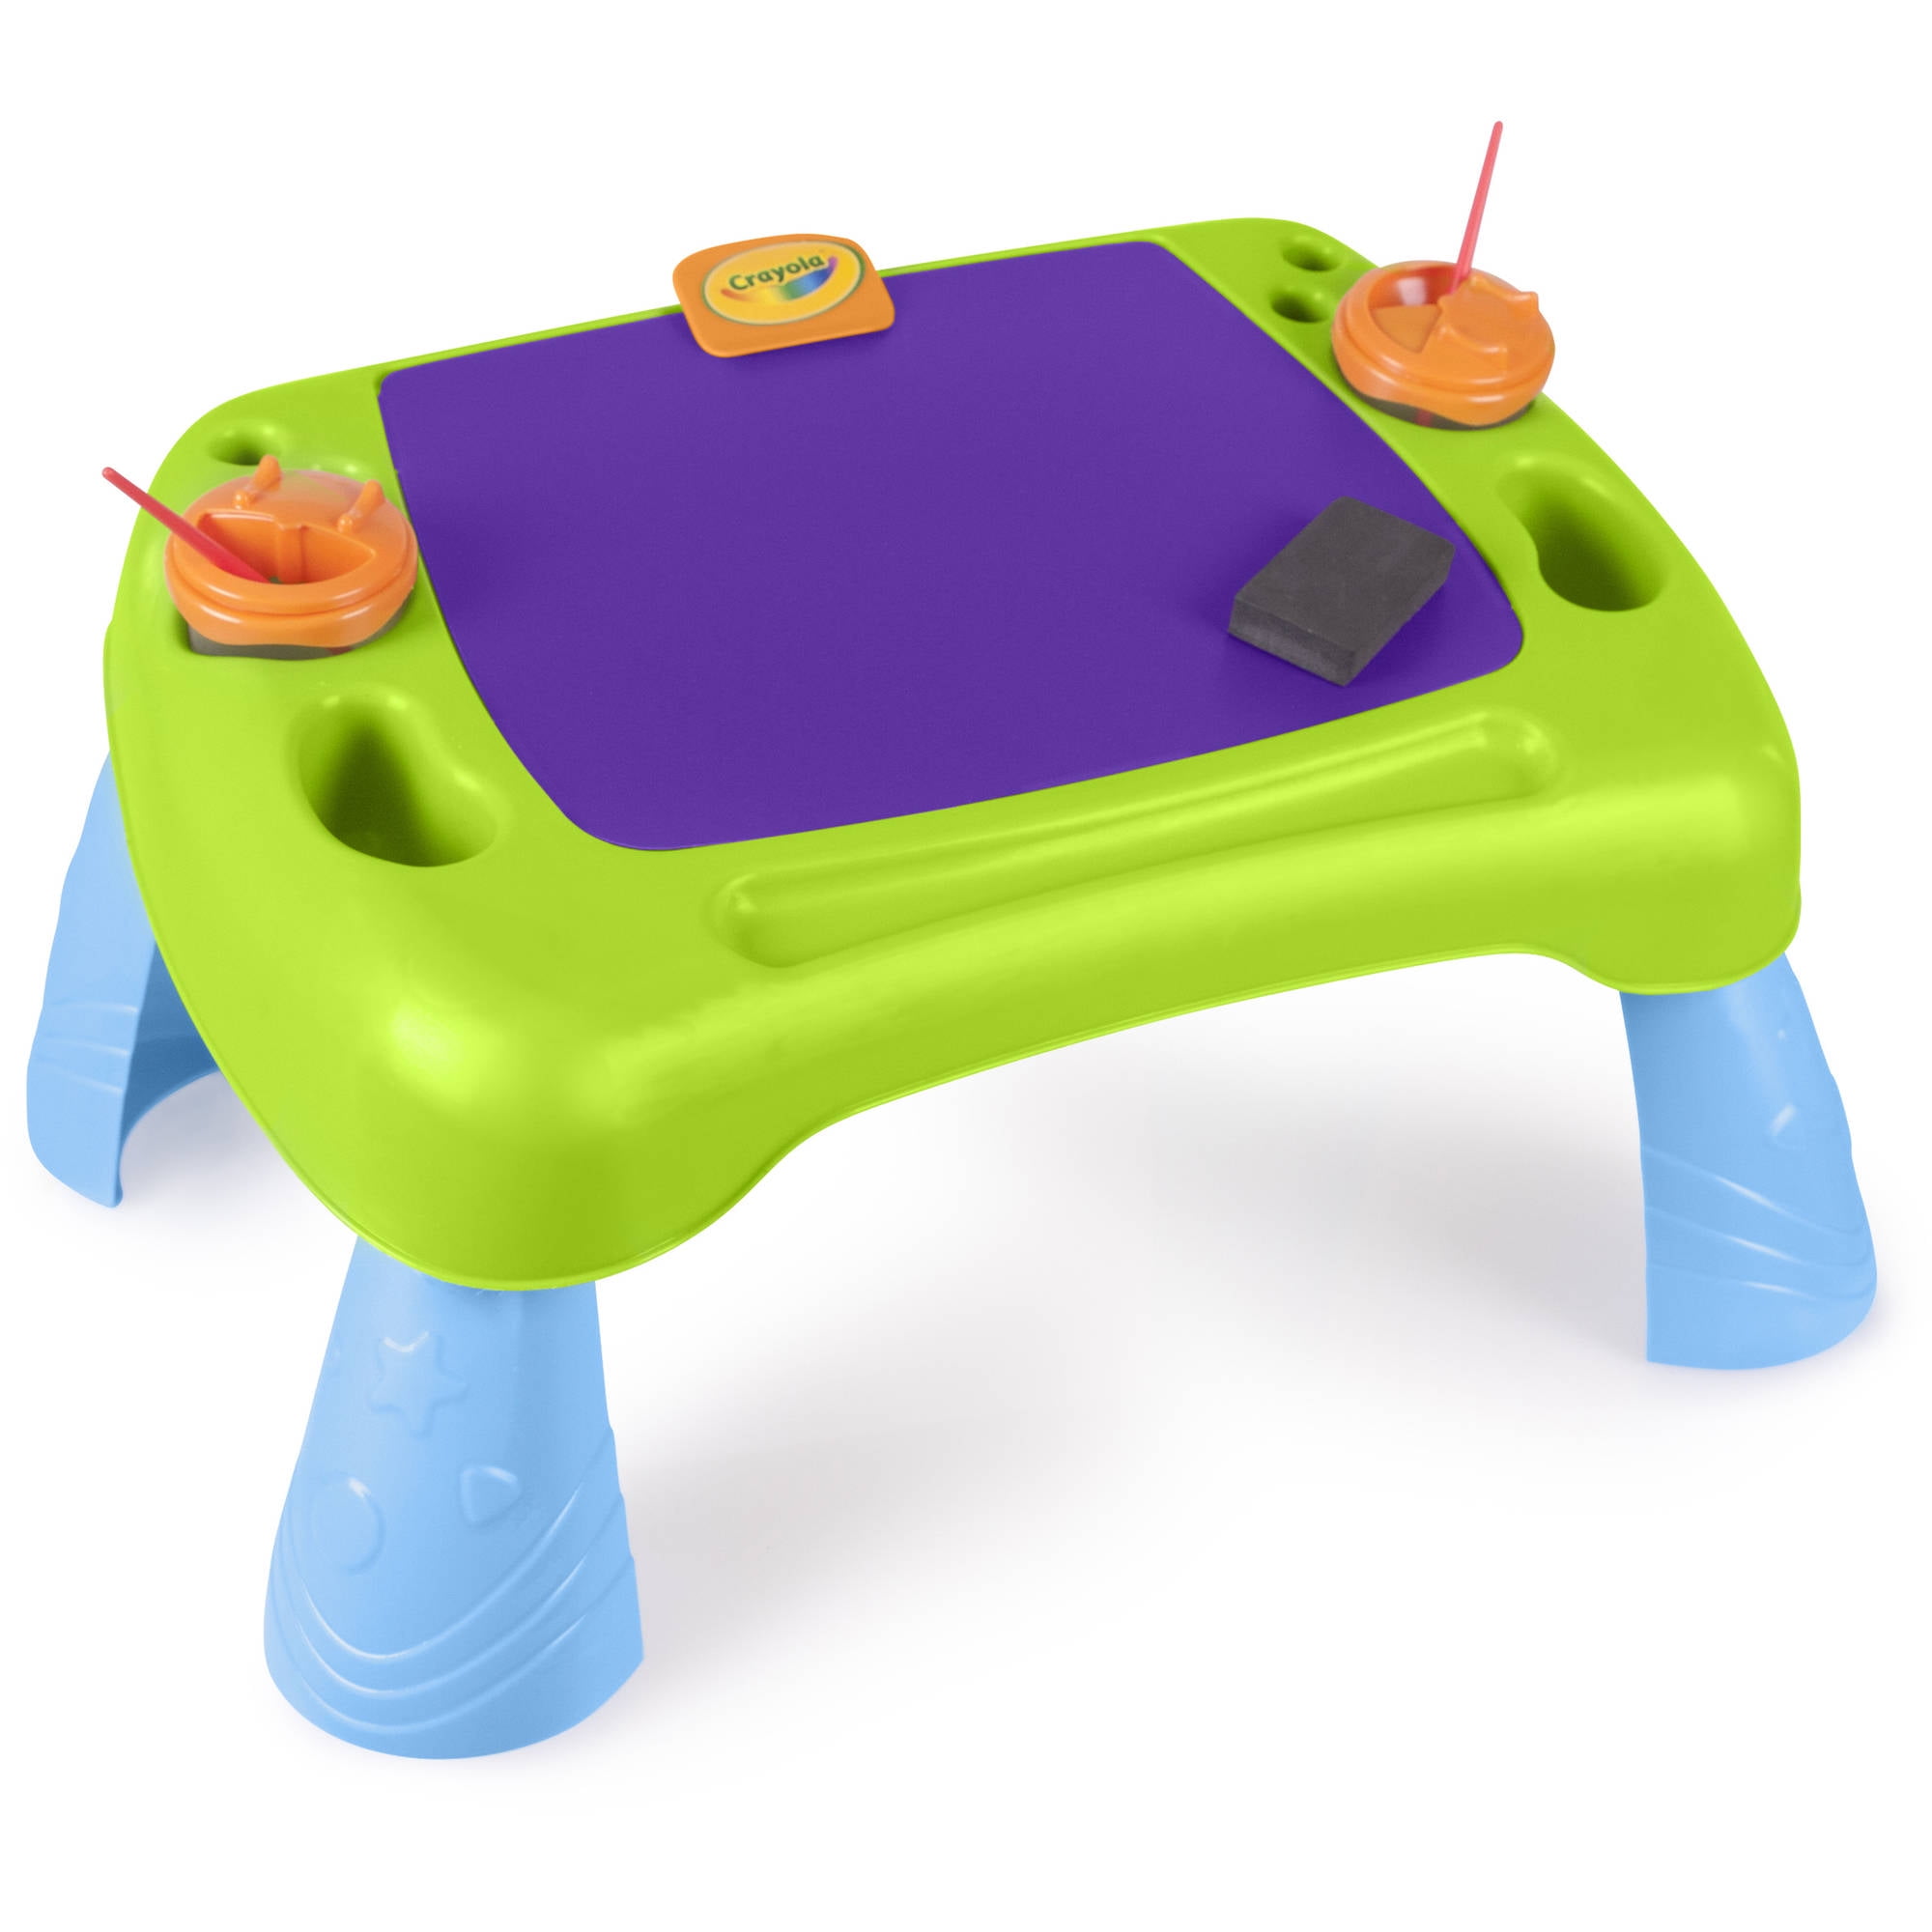 Keter Sit & Draw Kids Art Table Creativity Desk, with Arts and